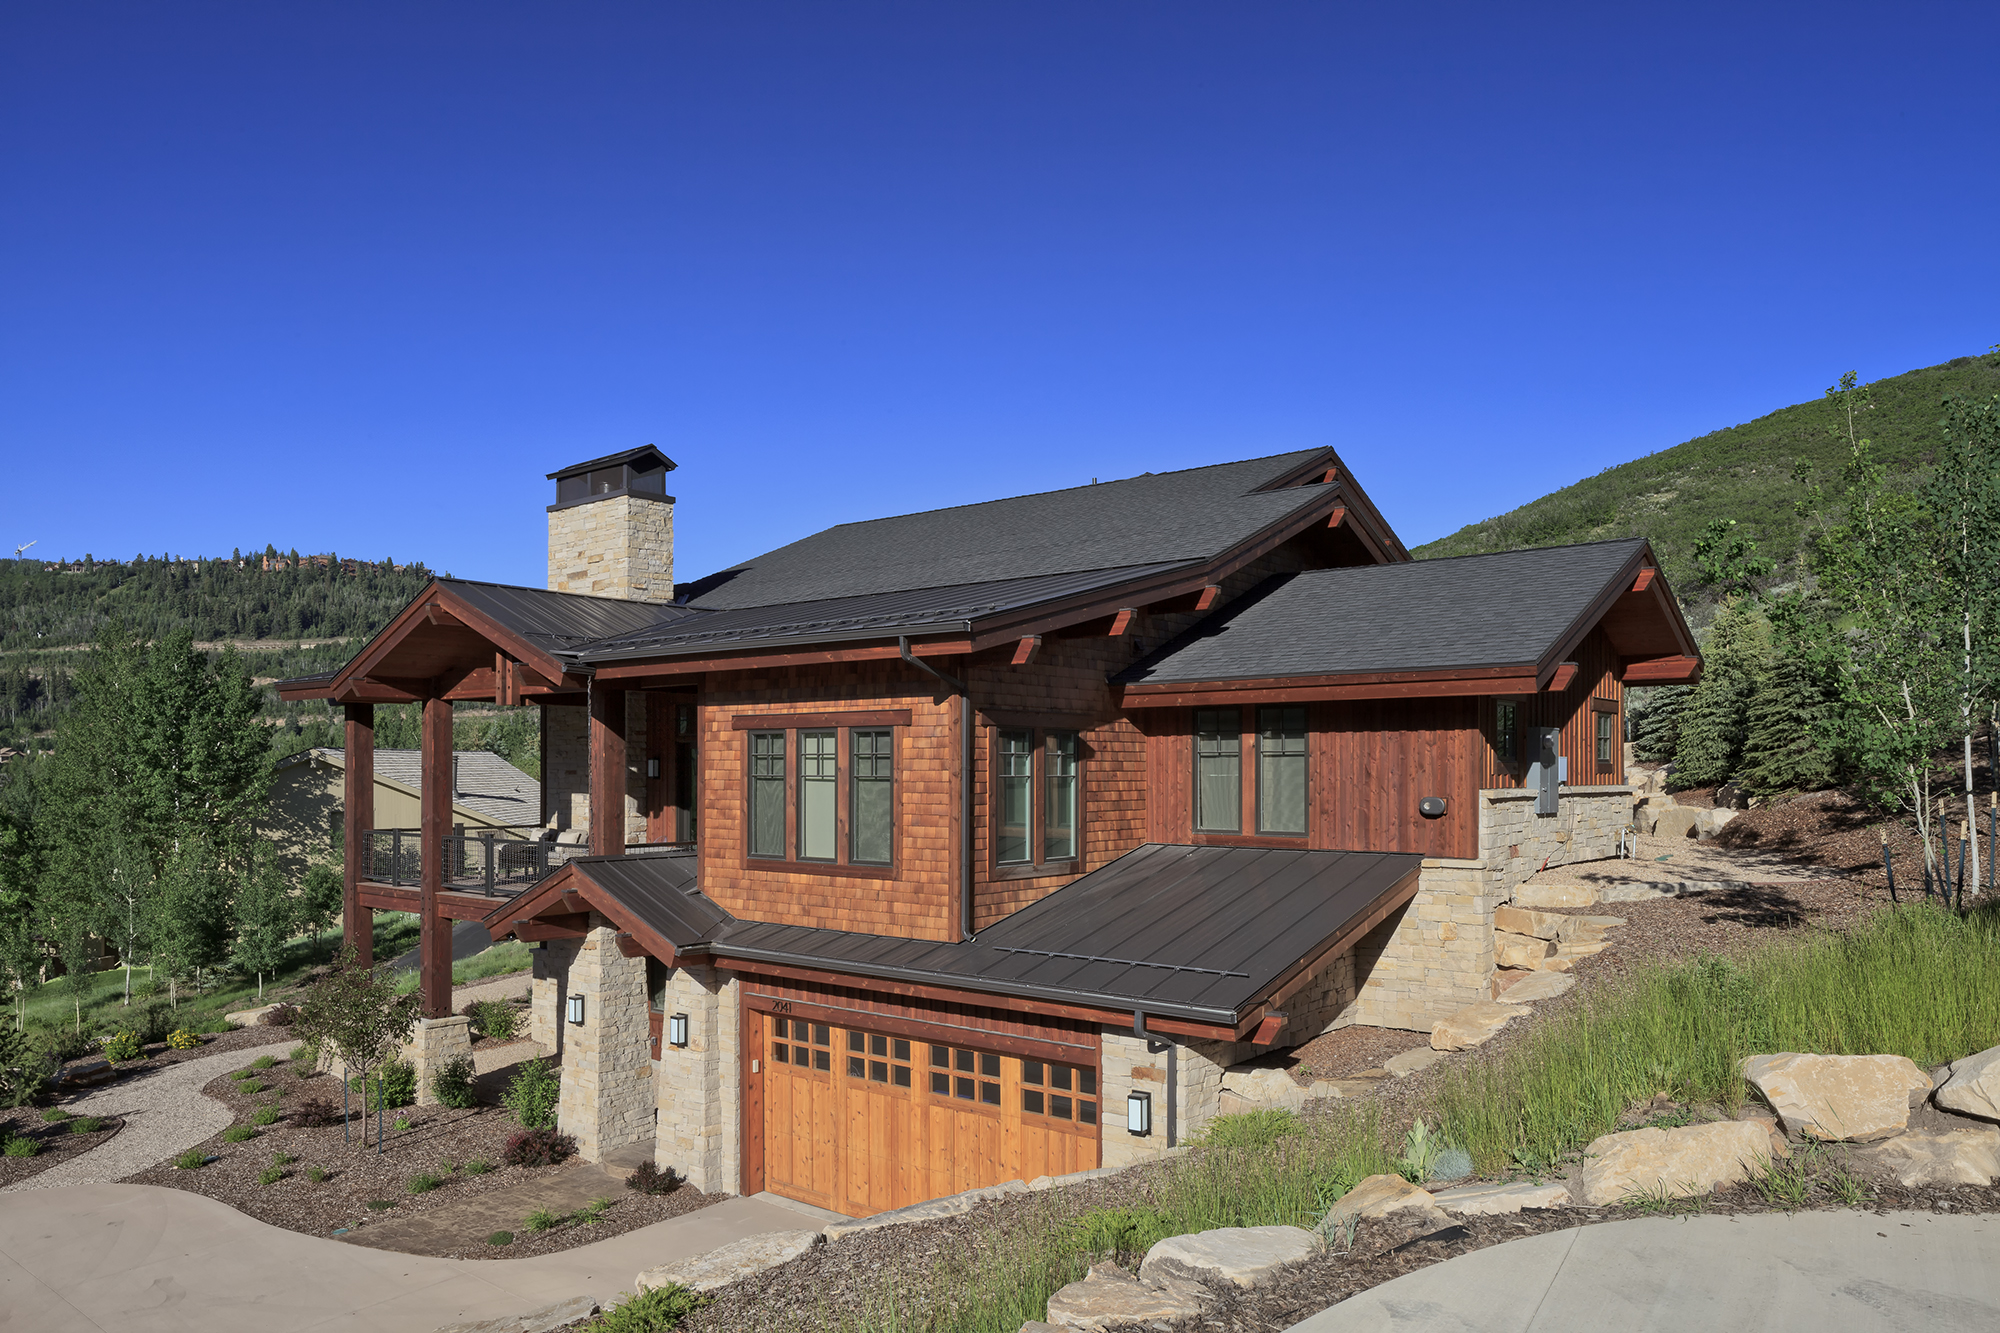 The right roofing choice can help homeowners beat the heat. Image courtesy of MRA member Drexel Metals